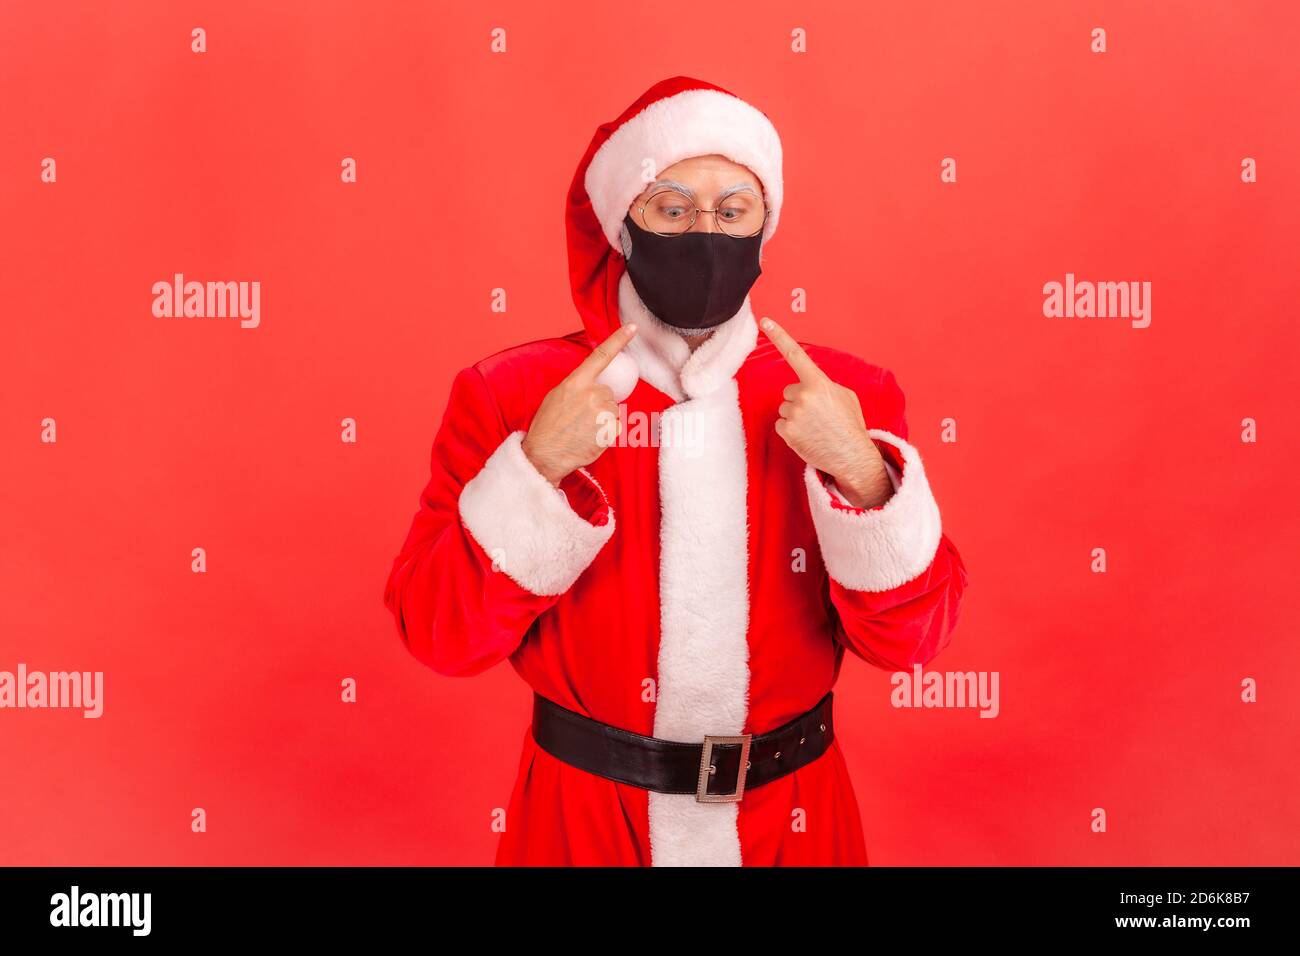 Scared funny man in santa claus costume pointing fingers and trying to look at protective hygienic mask on his face, tired of covid-19 epidemic. Indoo Stock Photo